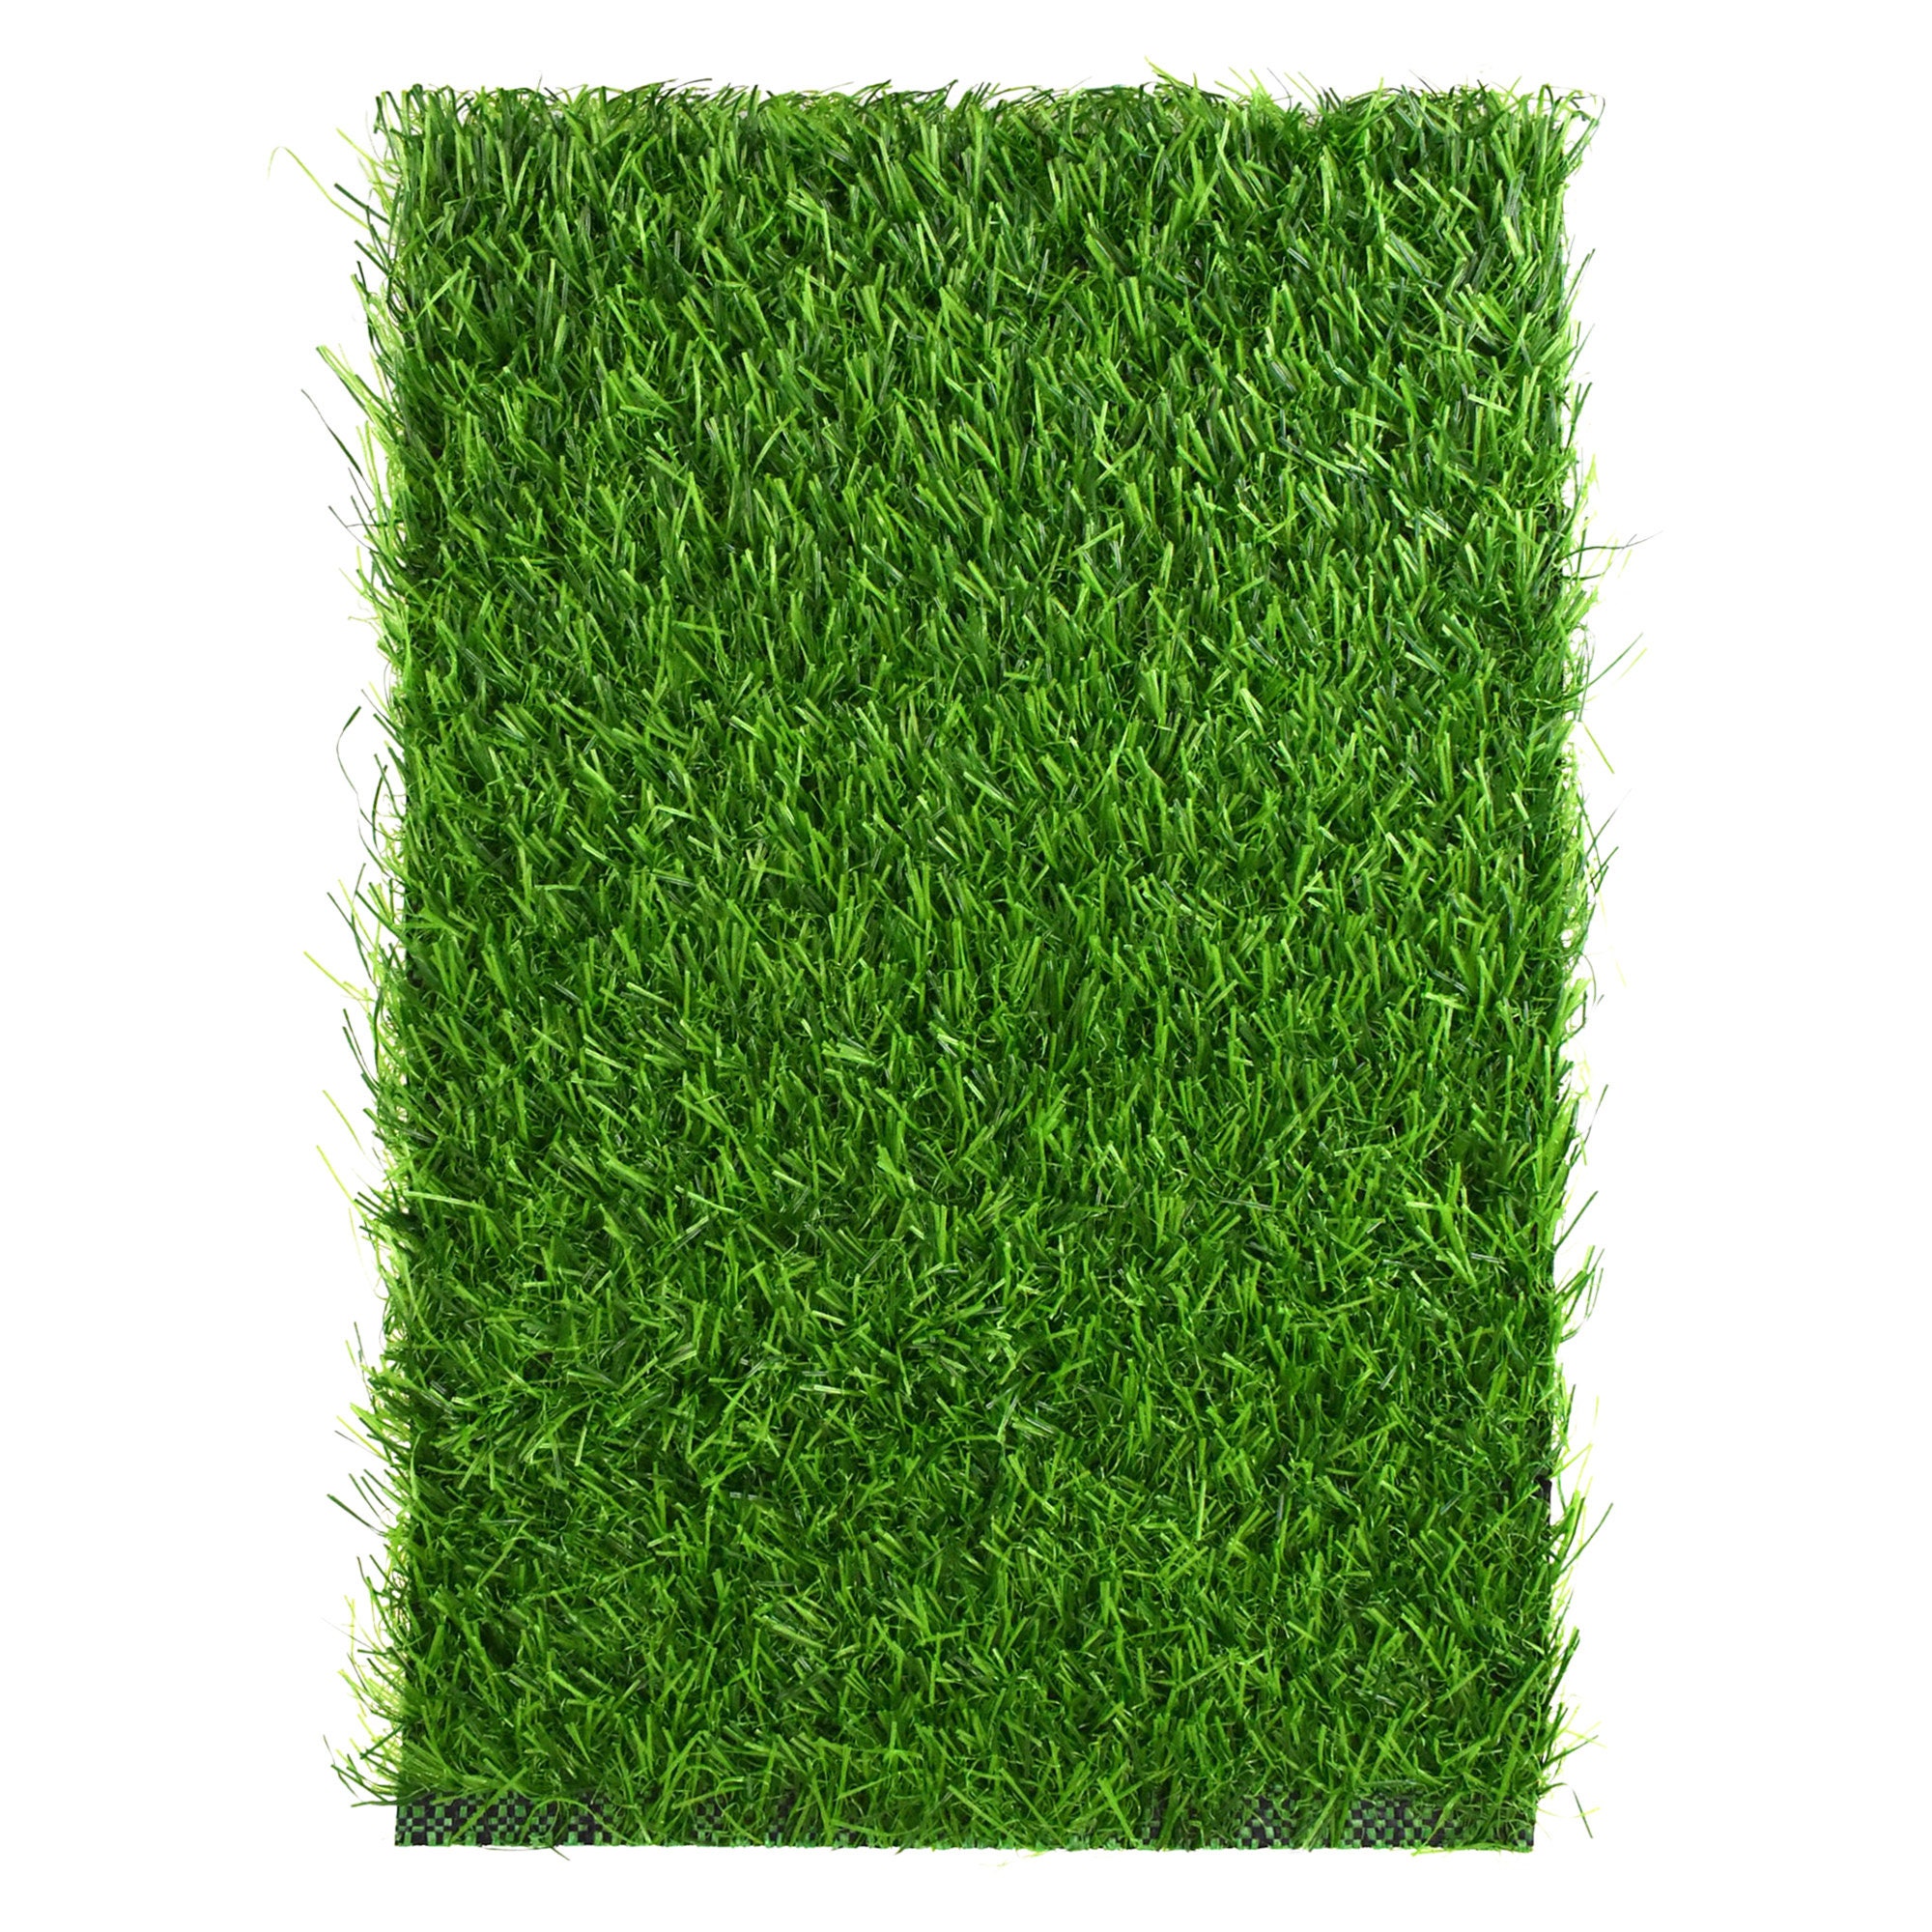 Artificial Turf Grass Rectangle 12-Inch Etsy 日本